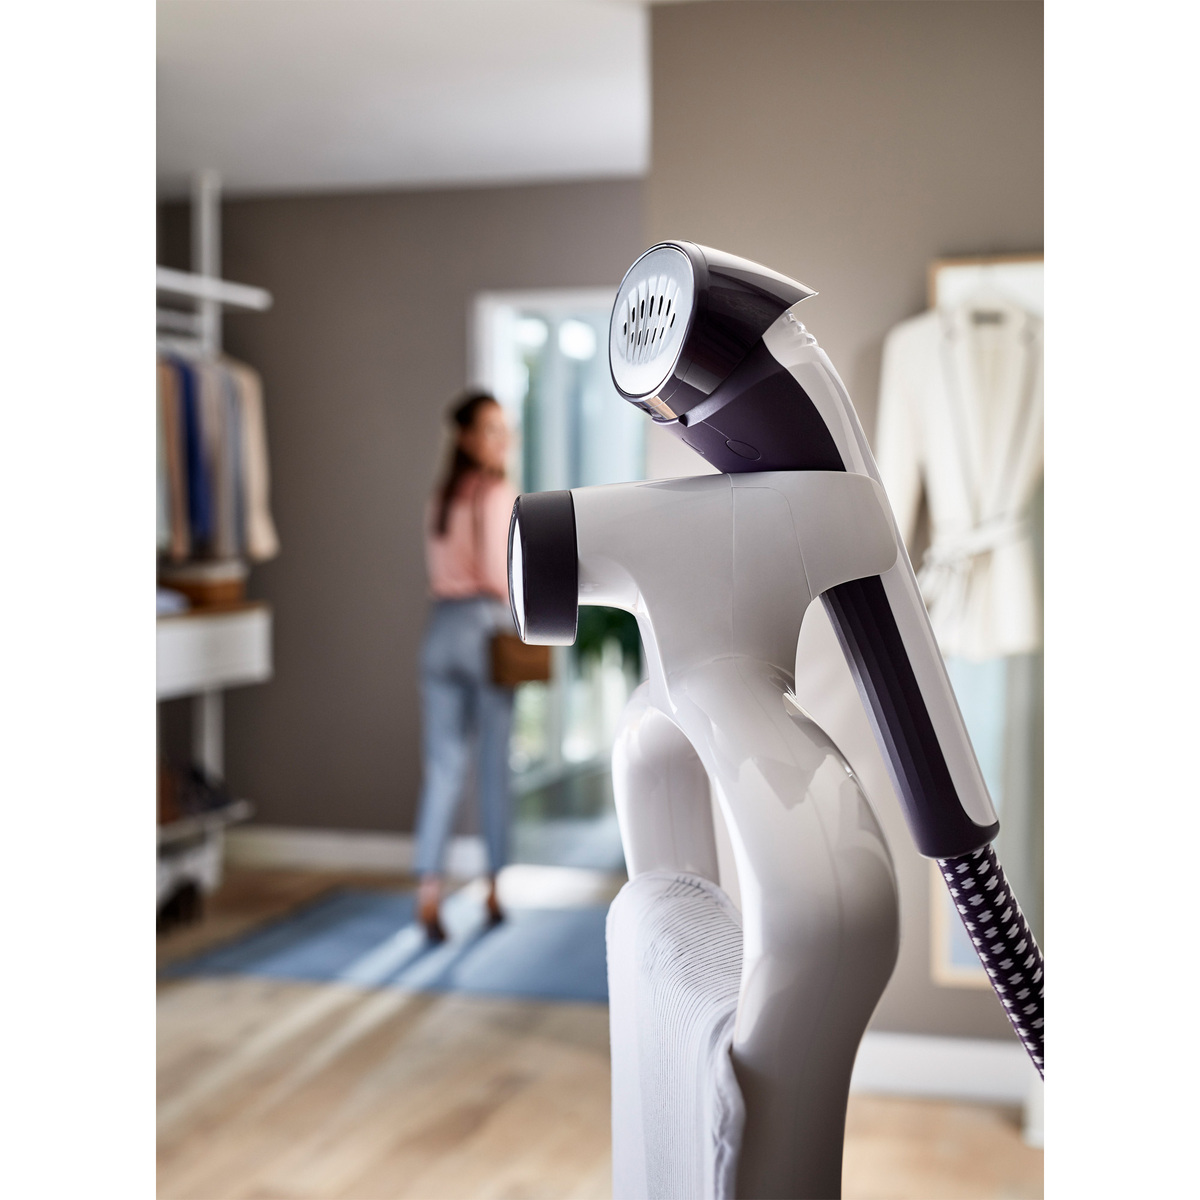 Philips ComfortTouch Plus Garment Steamer with StyleBoard, 2000 W, Purple Magic, GC558/36